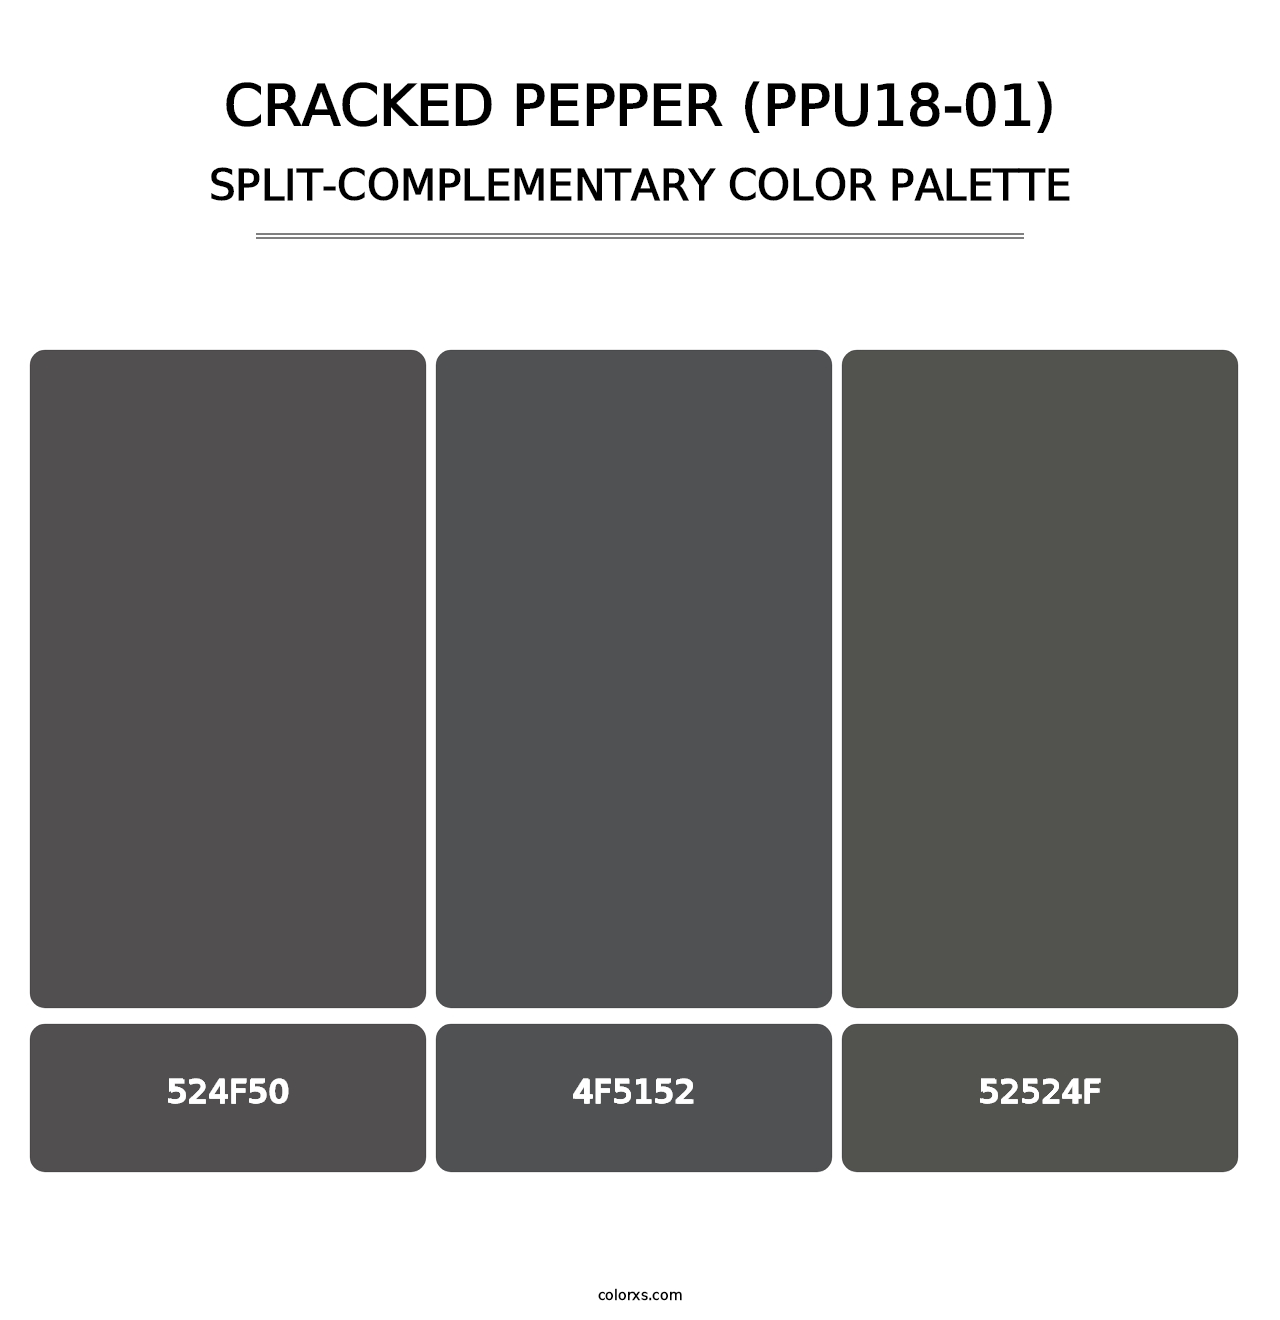 Cracked Pepper (PPU18-01) - Split-Complementary Color Palette